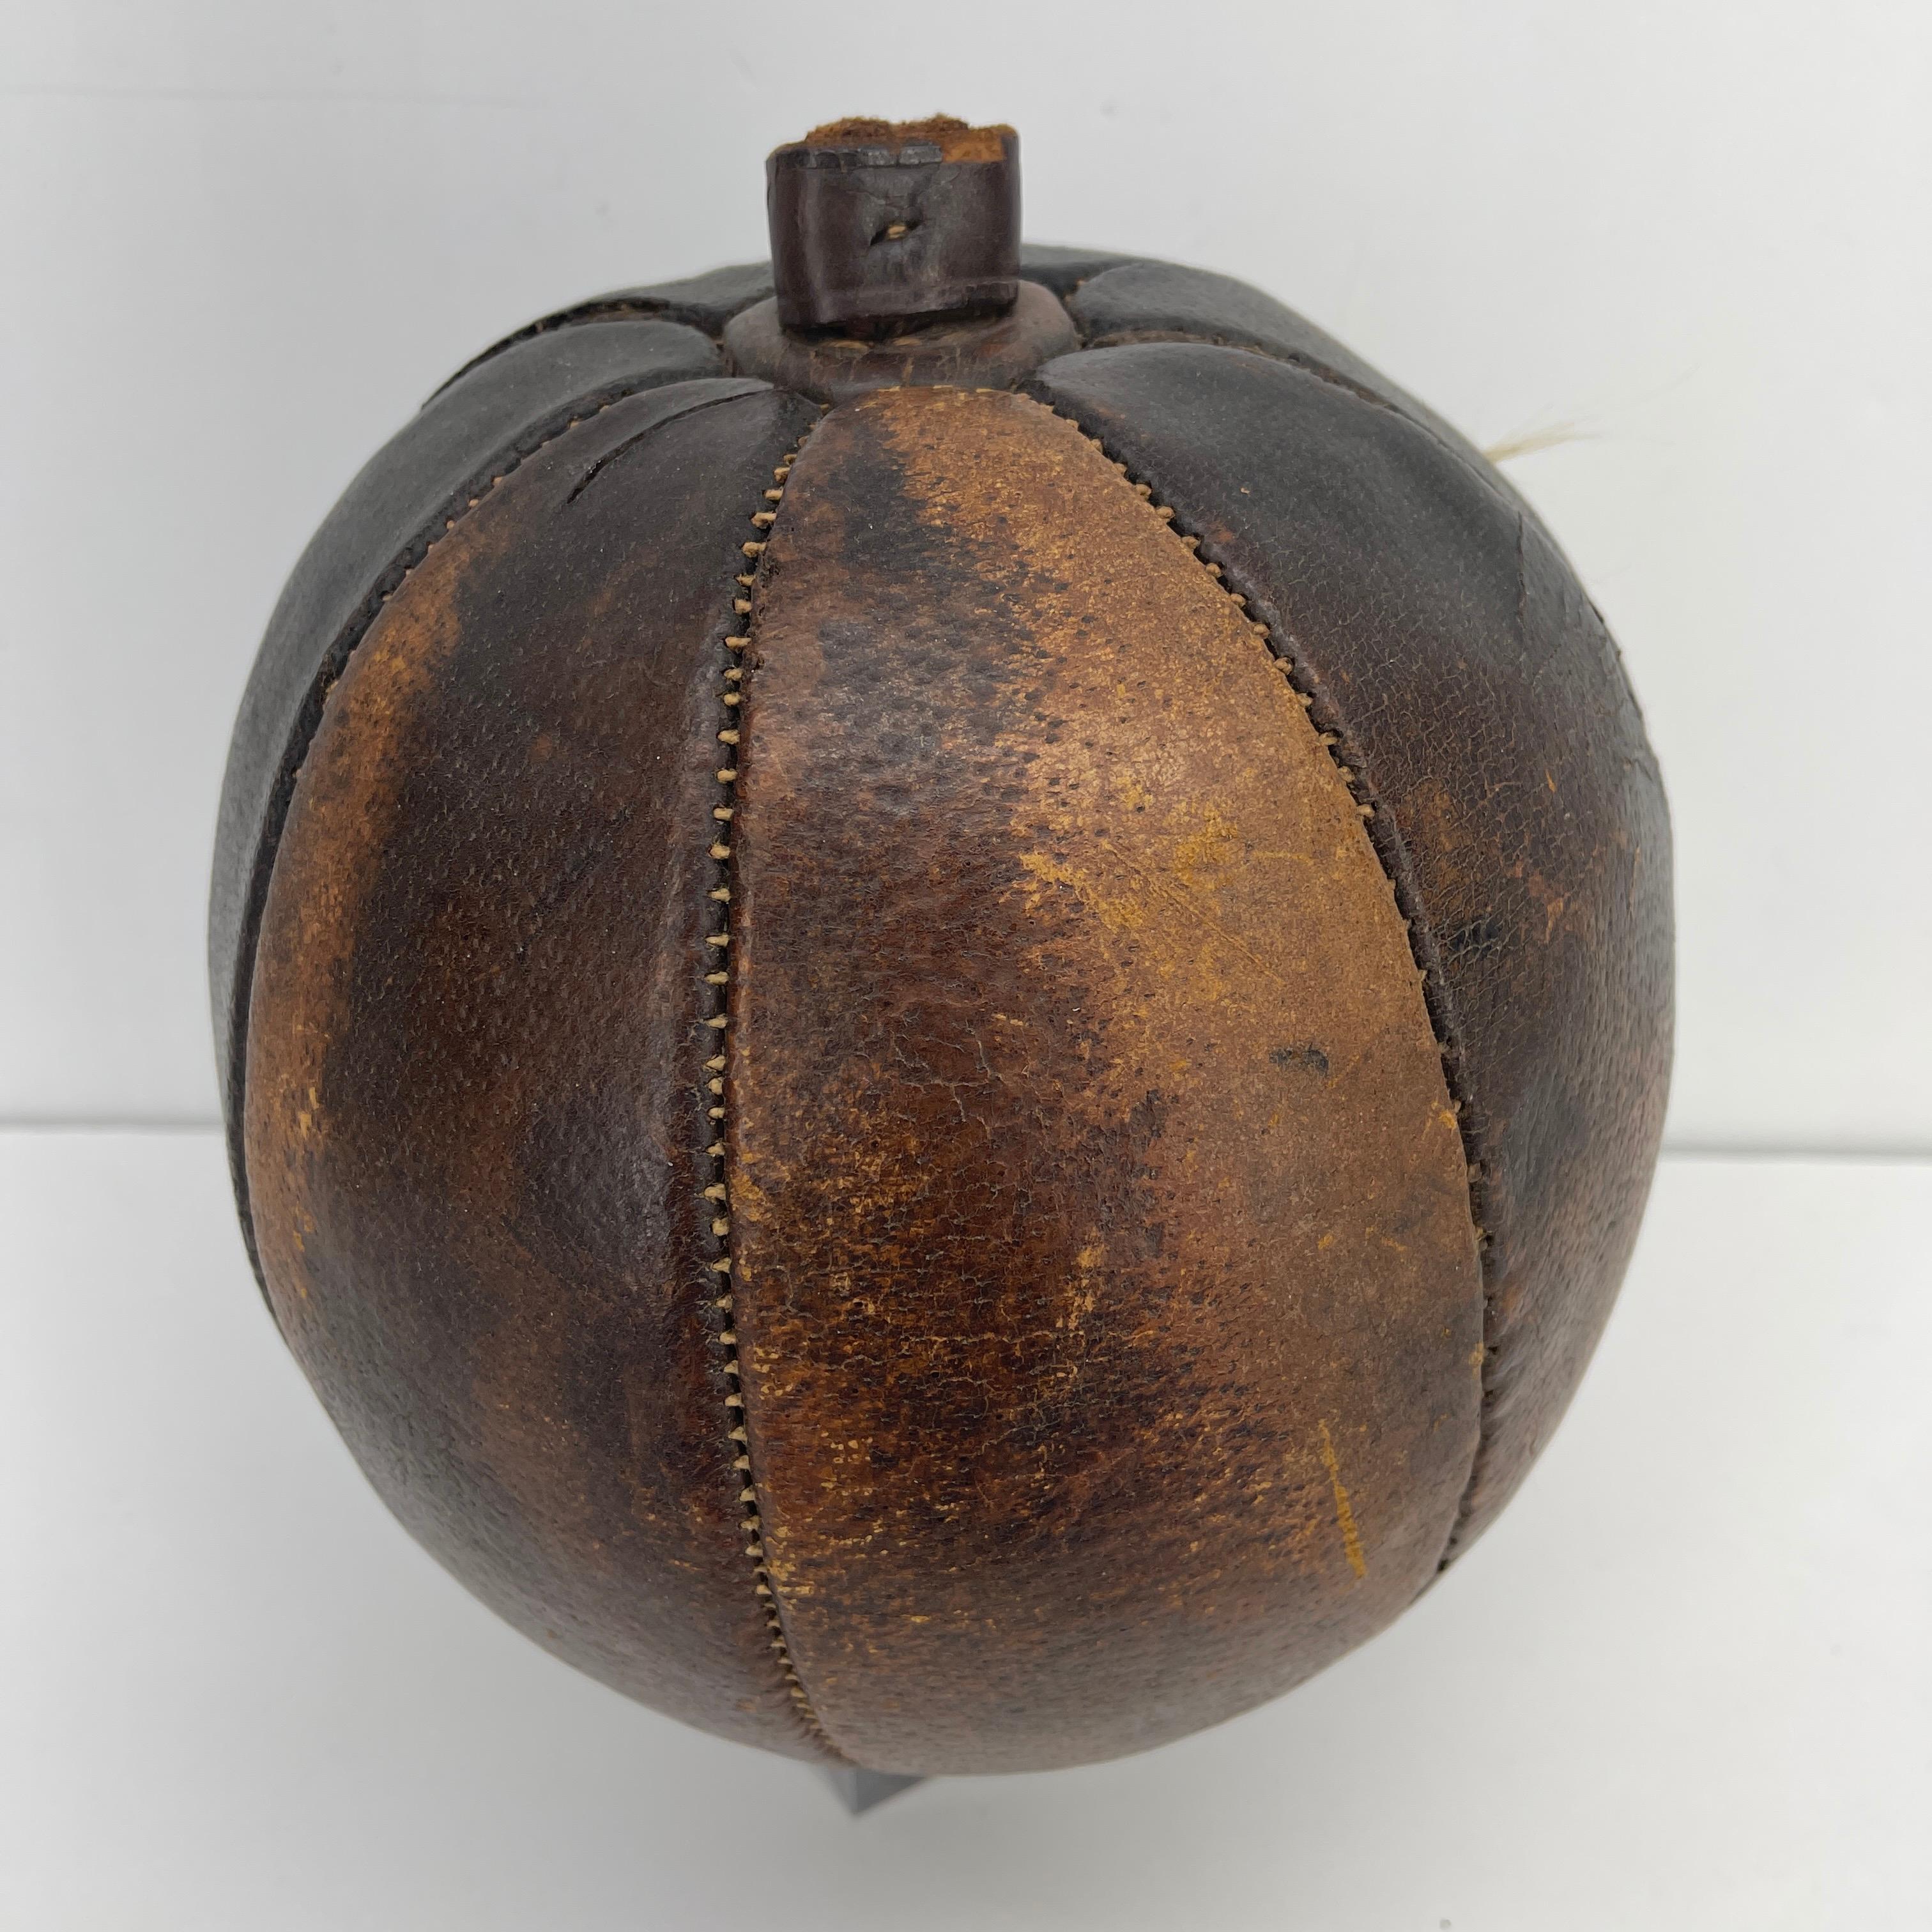 Mid-Century Modern Abercrombie & Fitch Hand-Stitched Leather Pumpkin by Omersa & Company For Sale